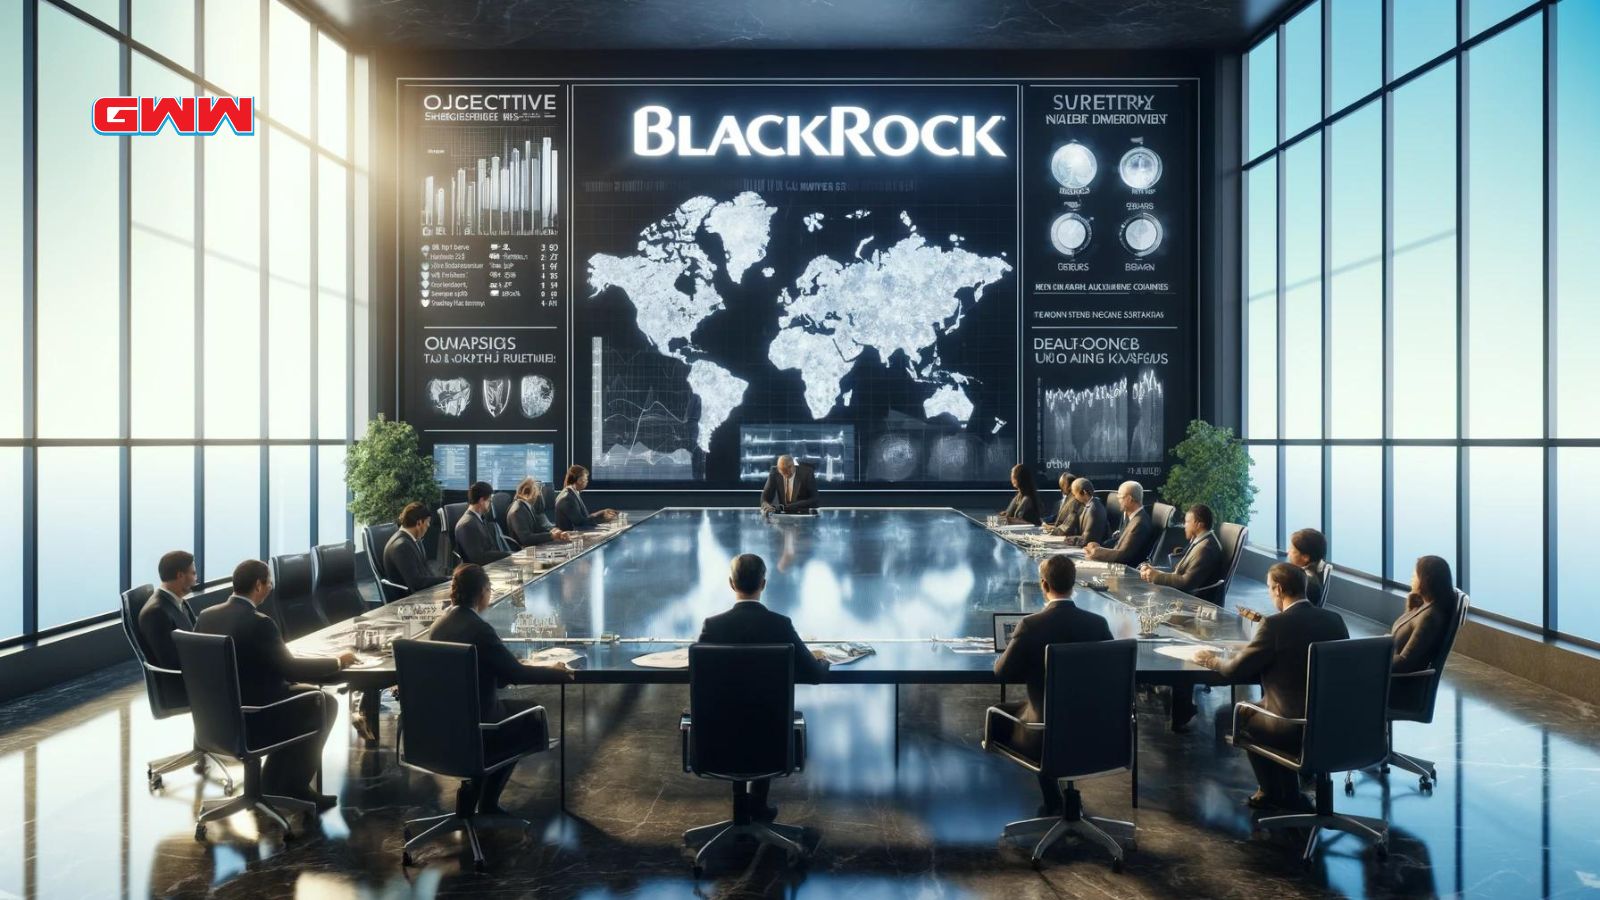 BlackRock strategy session in a modern office environment